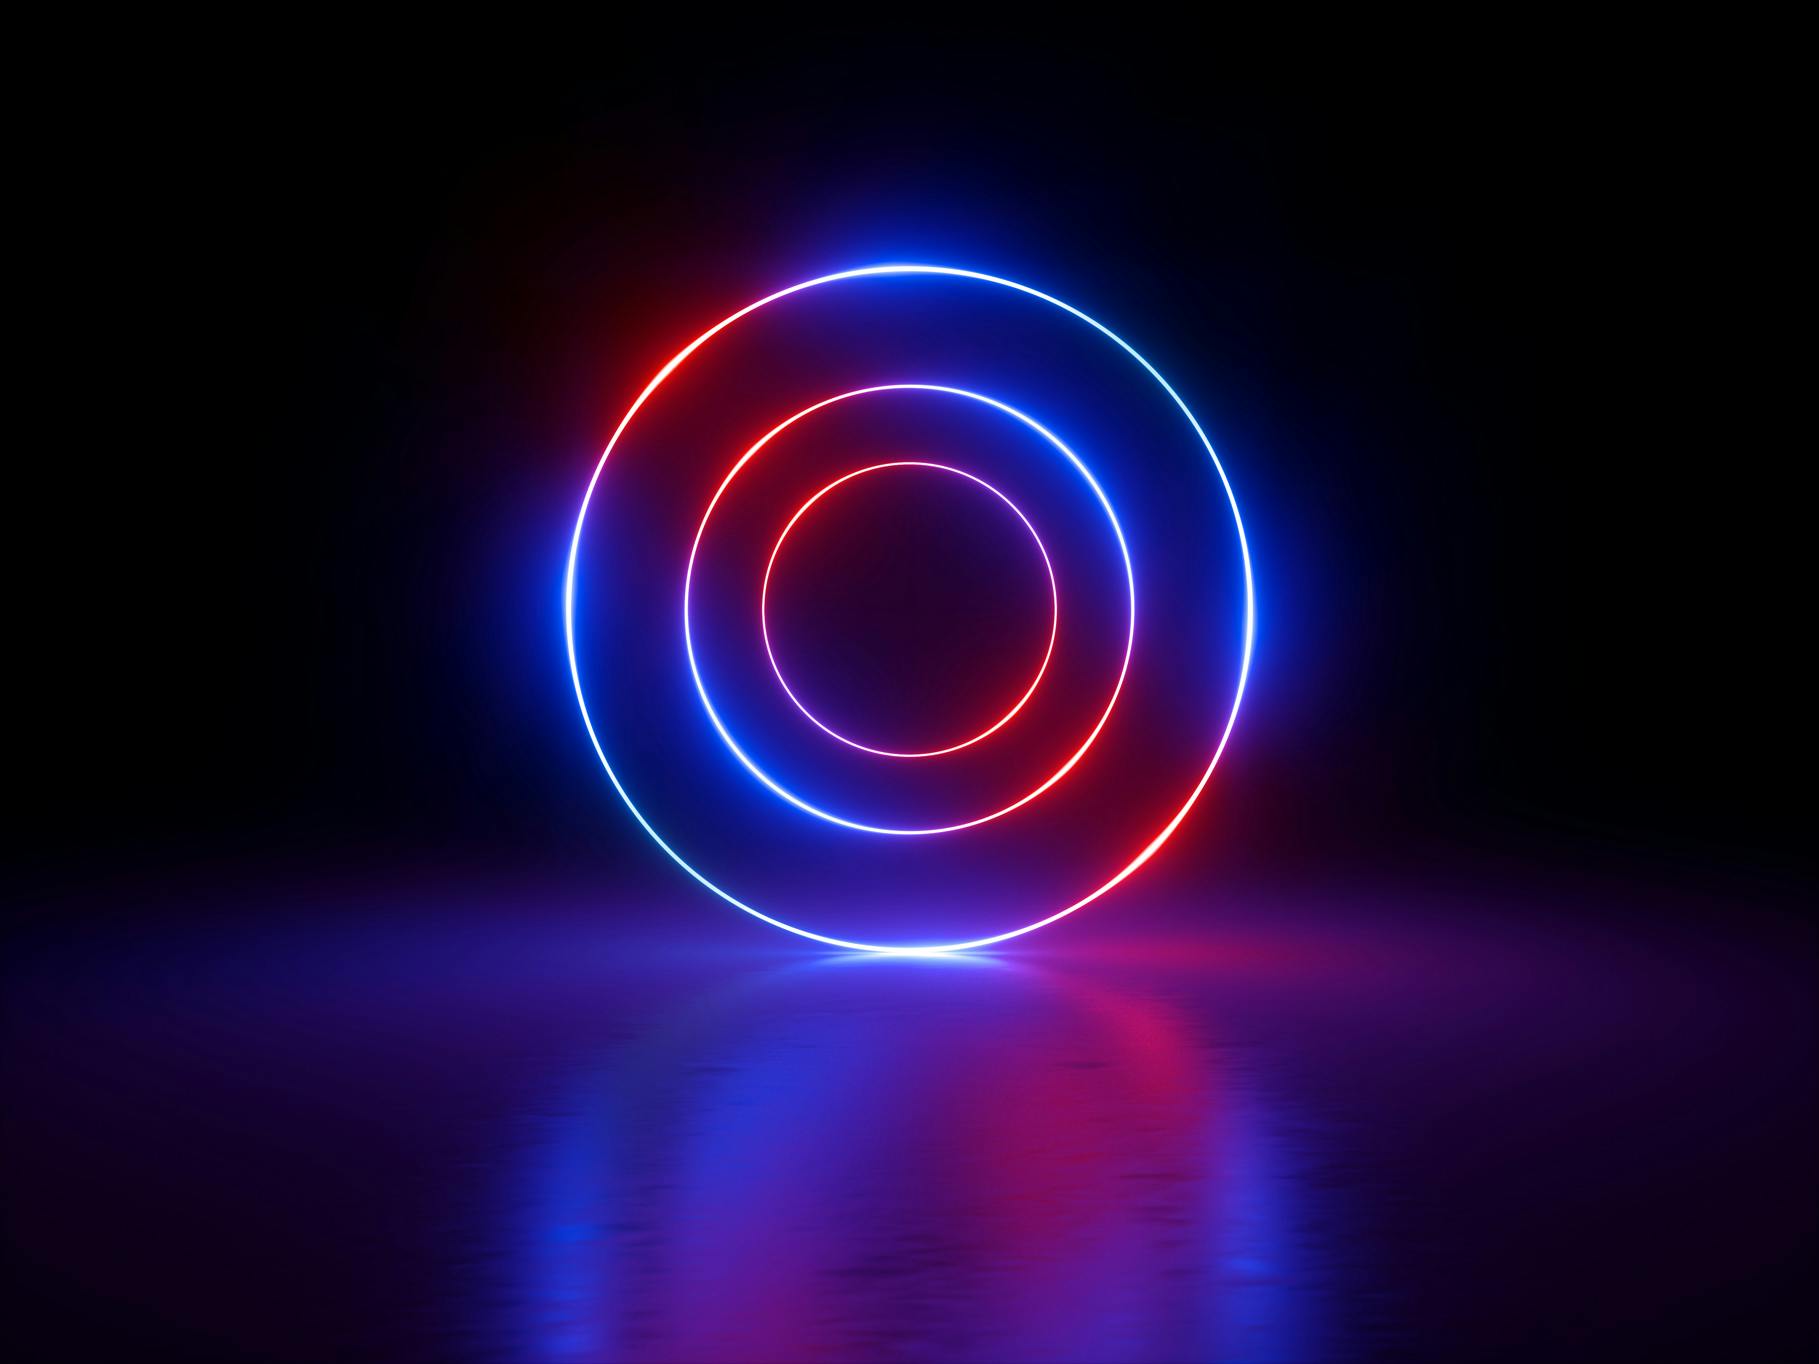 3d render, glowing rings, round lines, tunnel, neon lights, abstract background, circles, red blue spectrum, virtual reality, vibrant colors, laser show